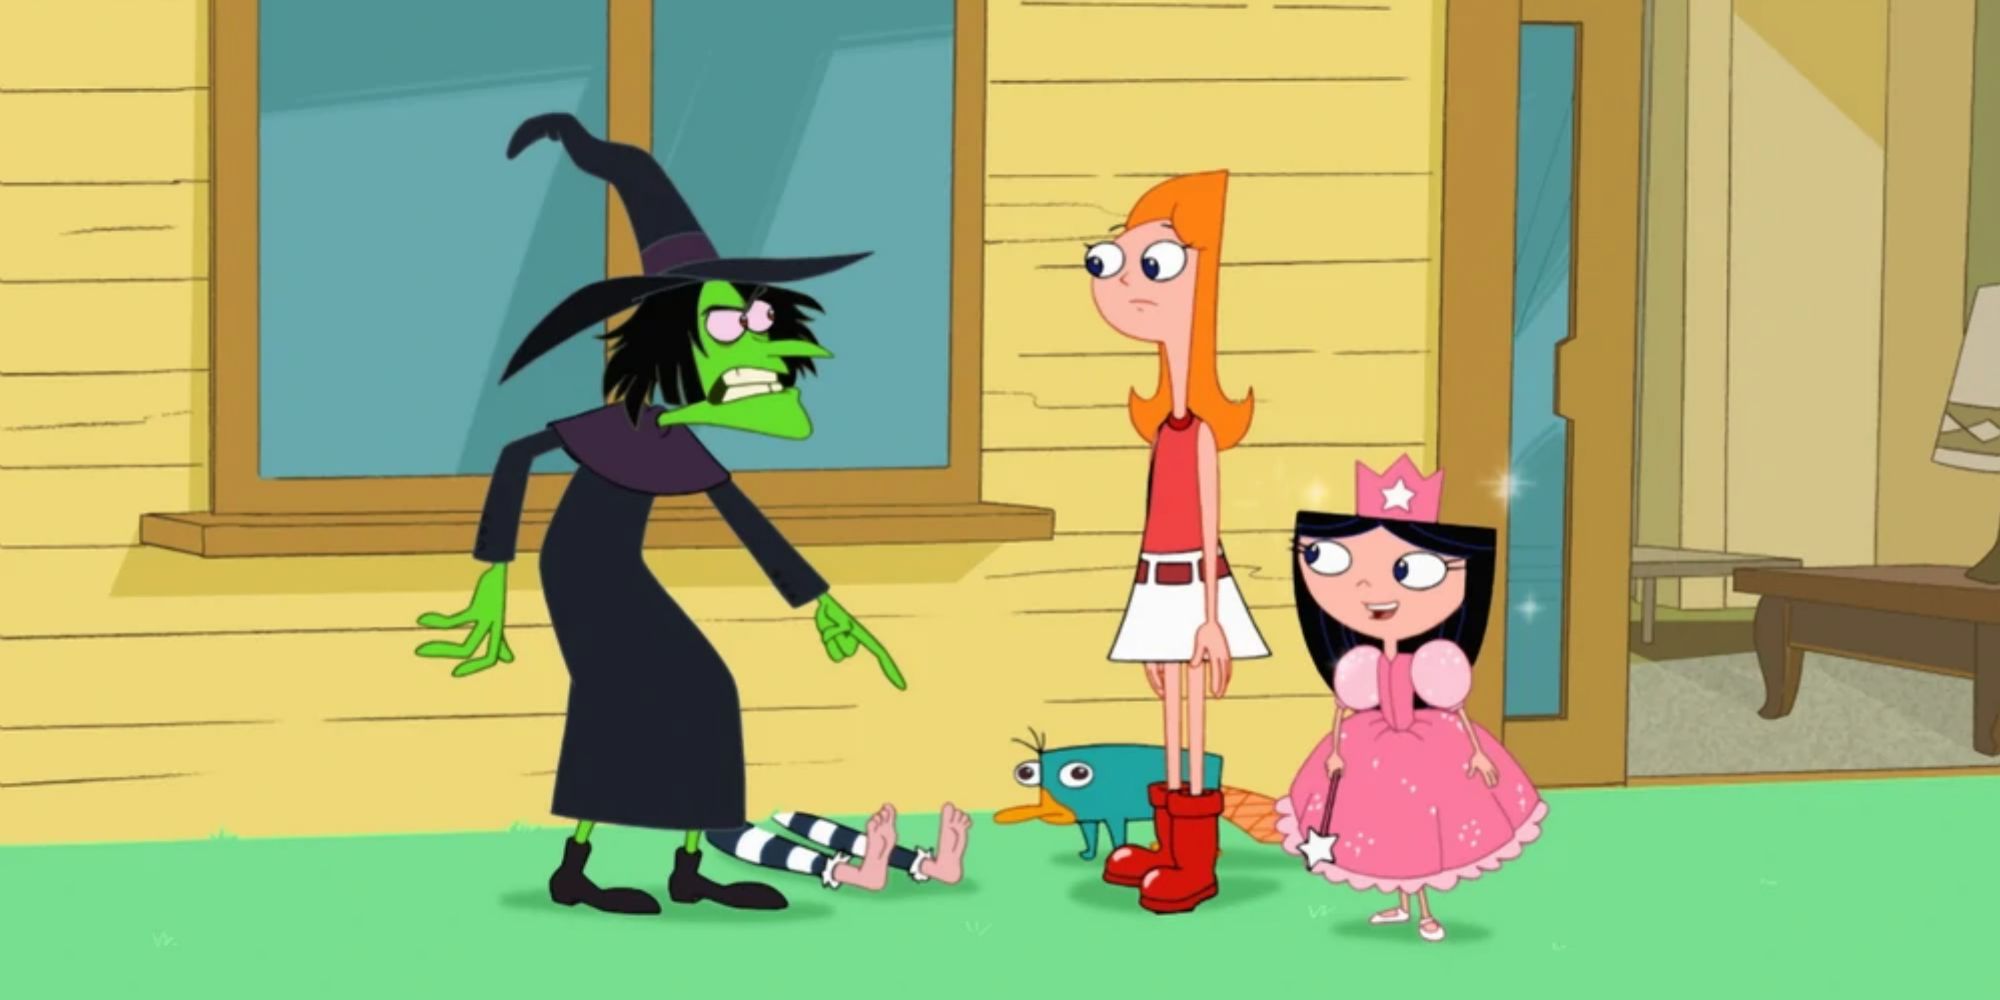 doofenshmirtz-candace-isabella-perry-wizard-of-odd-phineas-and-ferb